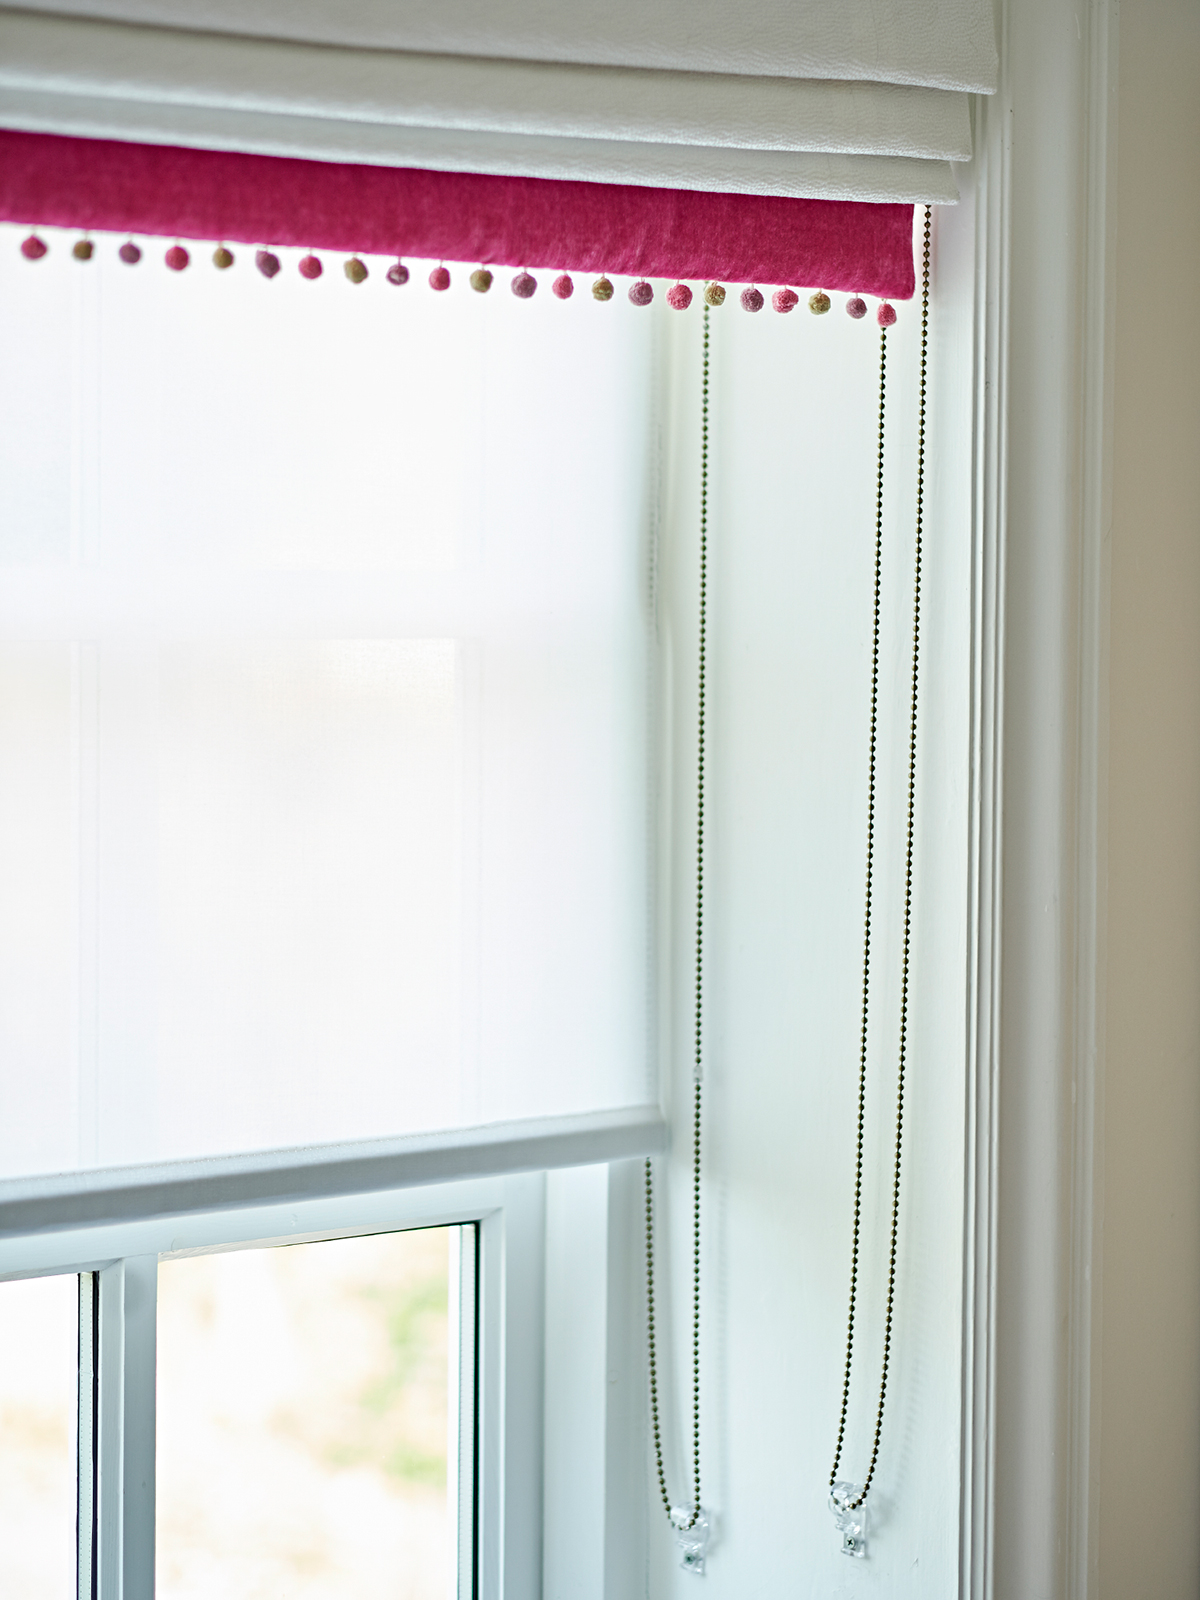 Roman blind with pom poms, and chain system